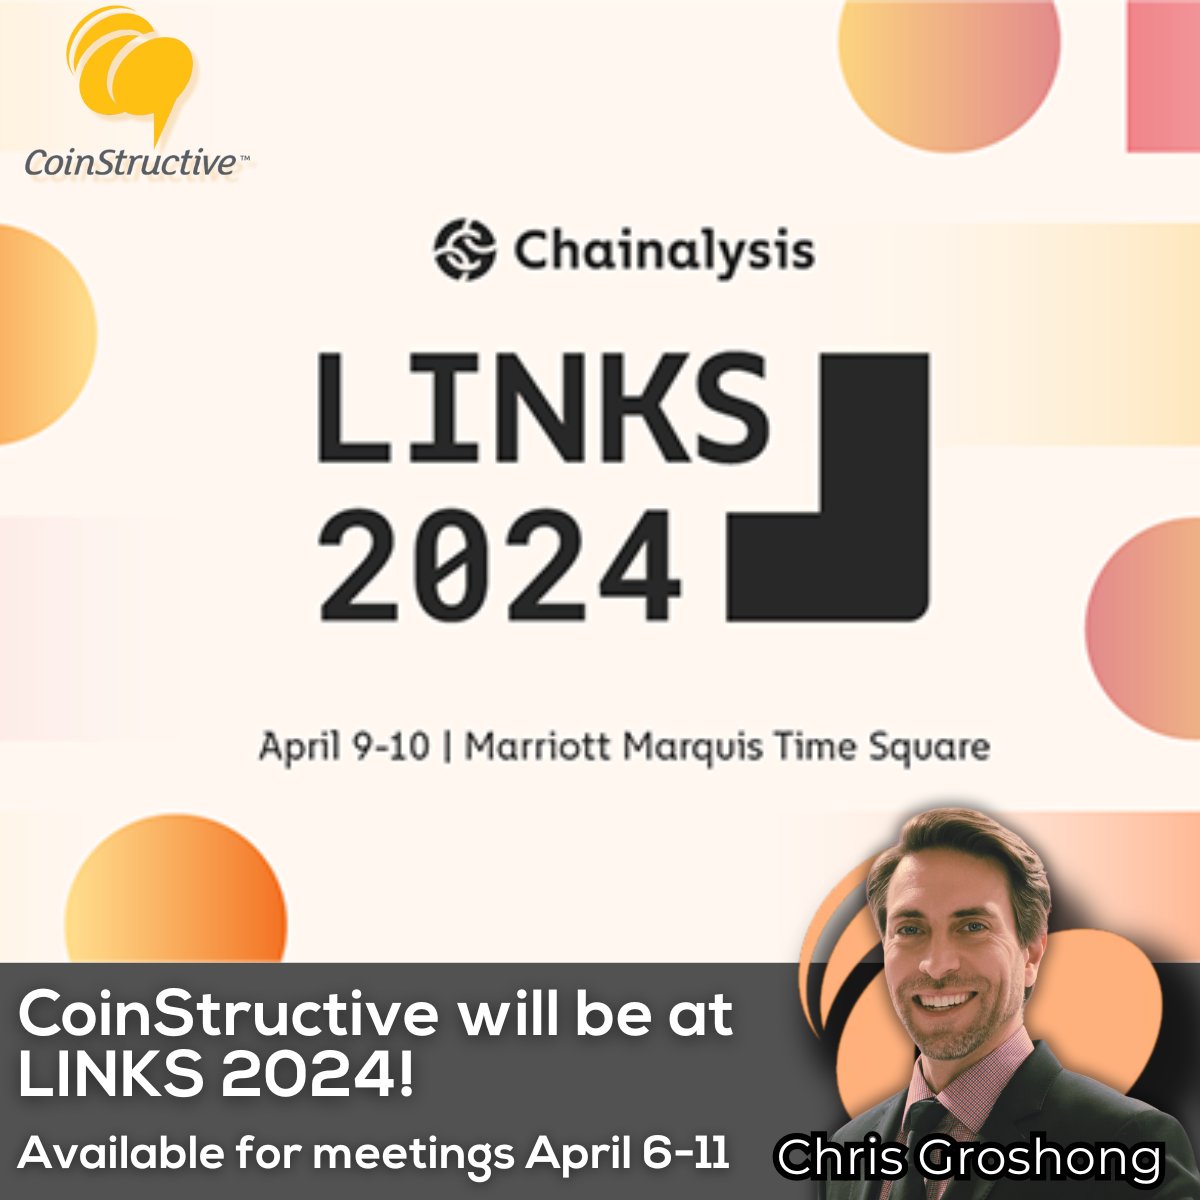 Are you going to #Chainalysis #Links2024? Our @djkinkle will be there and is looking forward to meeting up with old and new faces in the space. If you have the time and you're in the #NewYork area from April 6-11, send Chris a DM to lock something in.